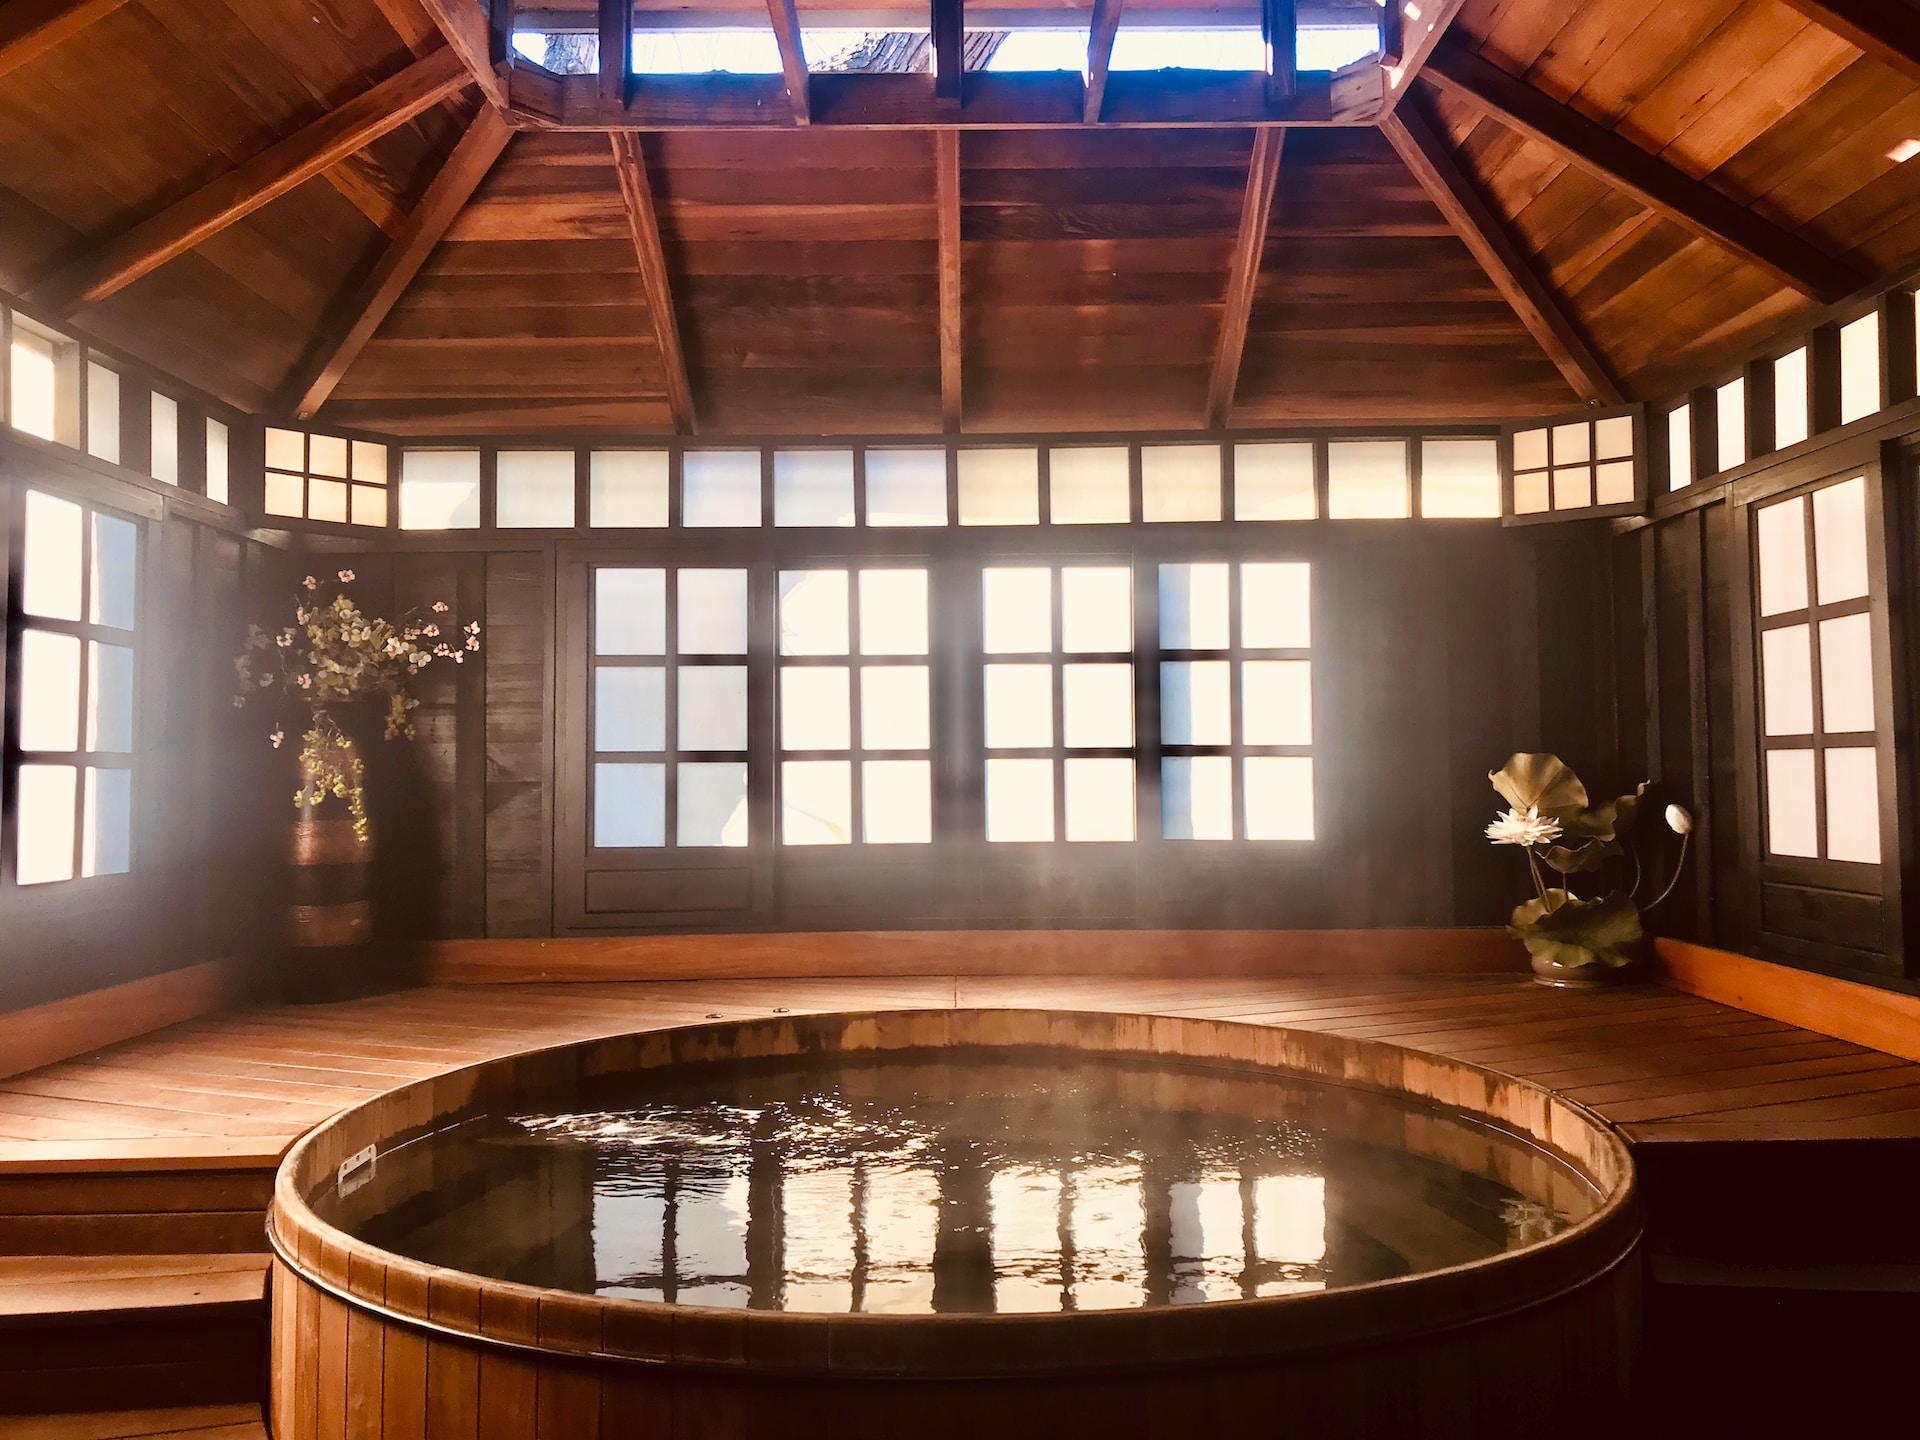 Photo by Cloris Ying on Unsplash. It's an image of a bathtub so magnificent it must've been crafted by an outer-wordly team